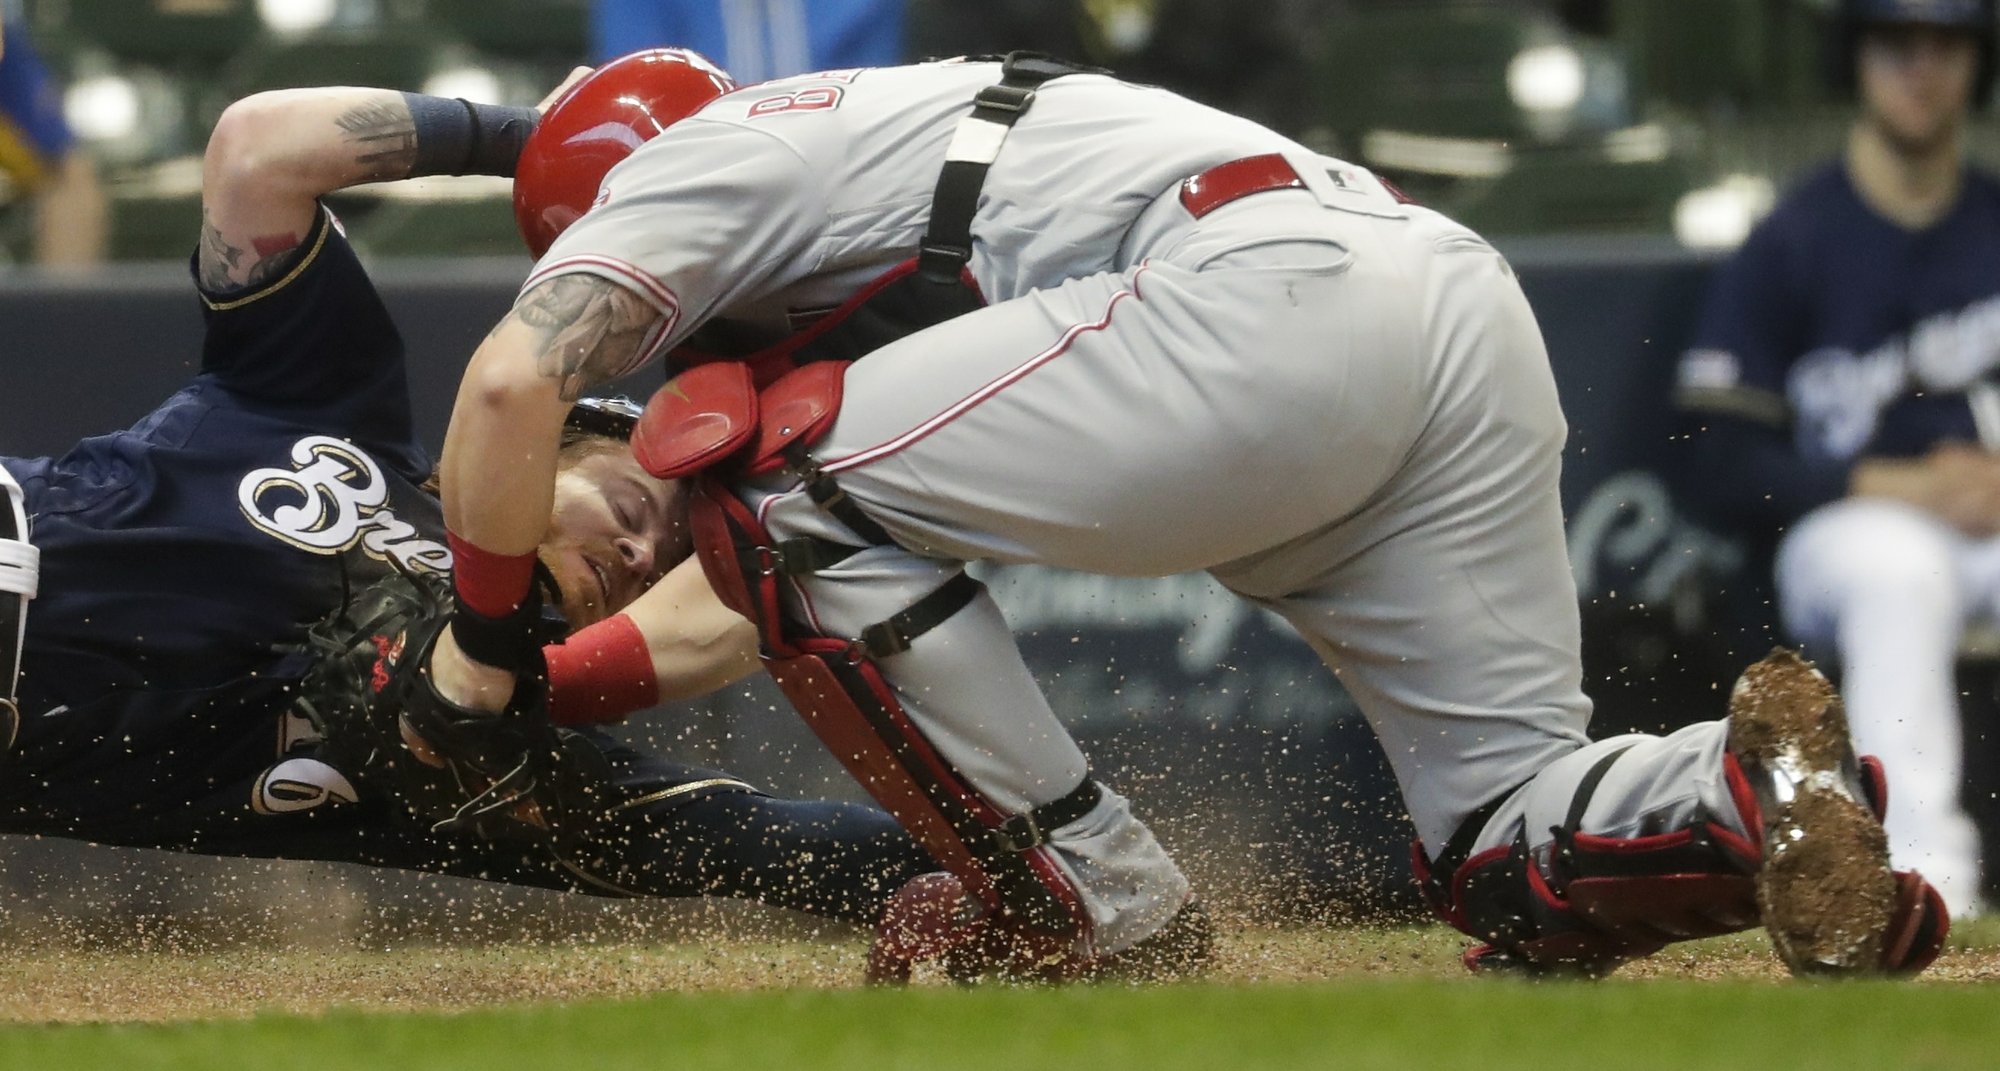 Bizarre double play helps Grandal, Brewers outlast Reds 11-9